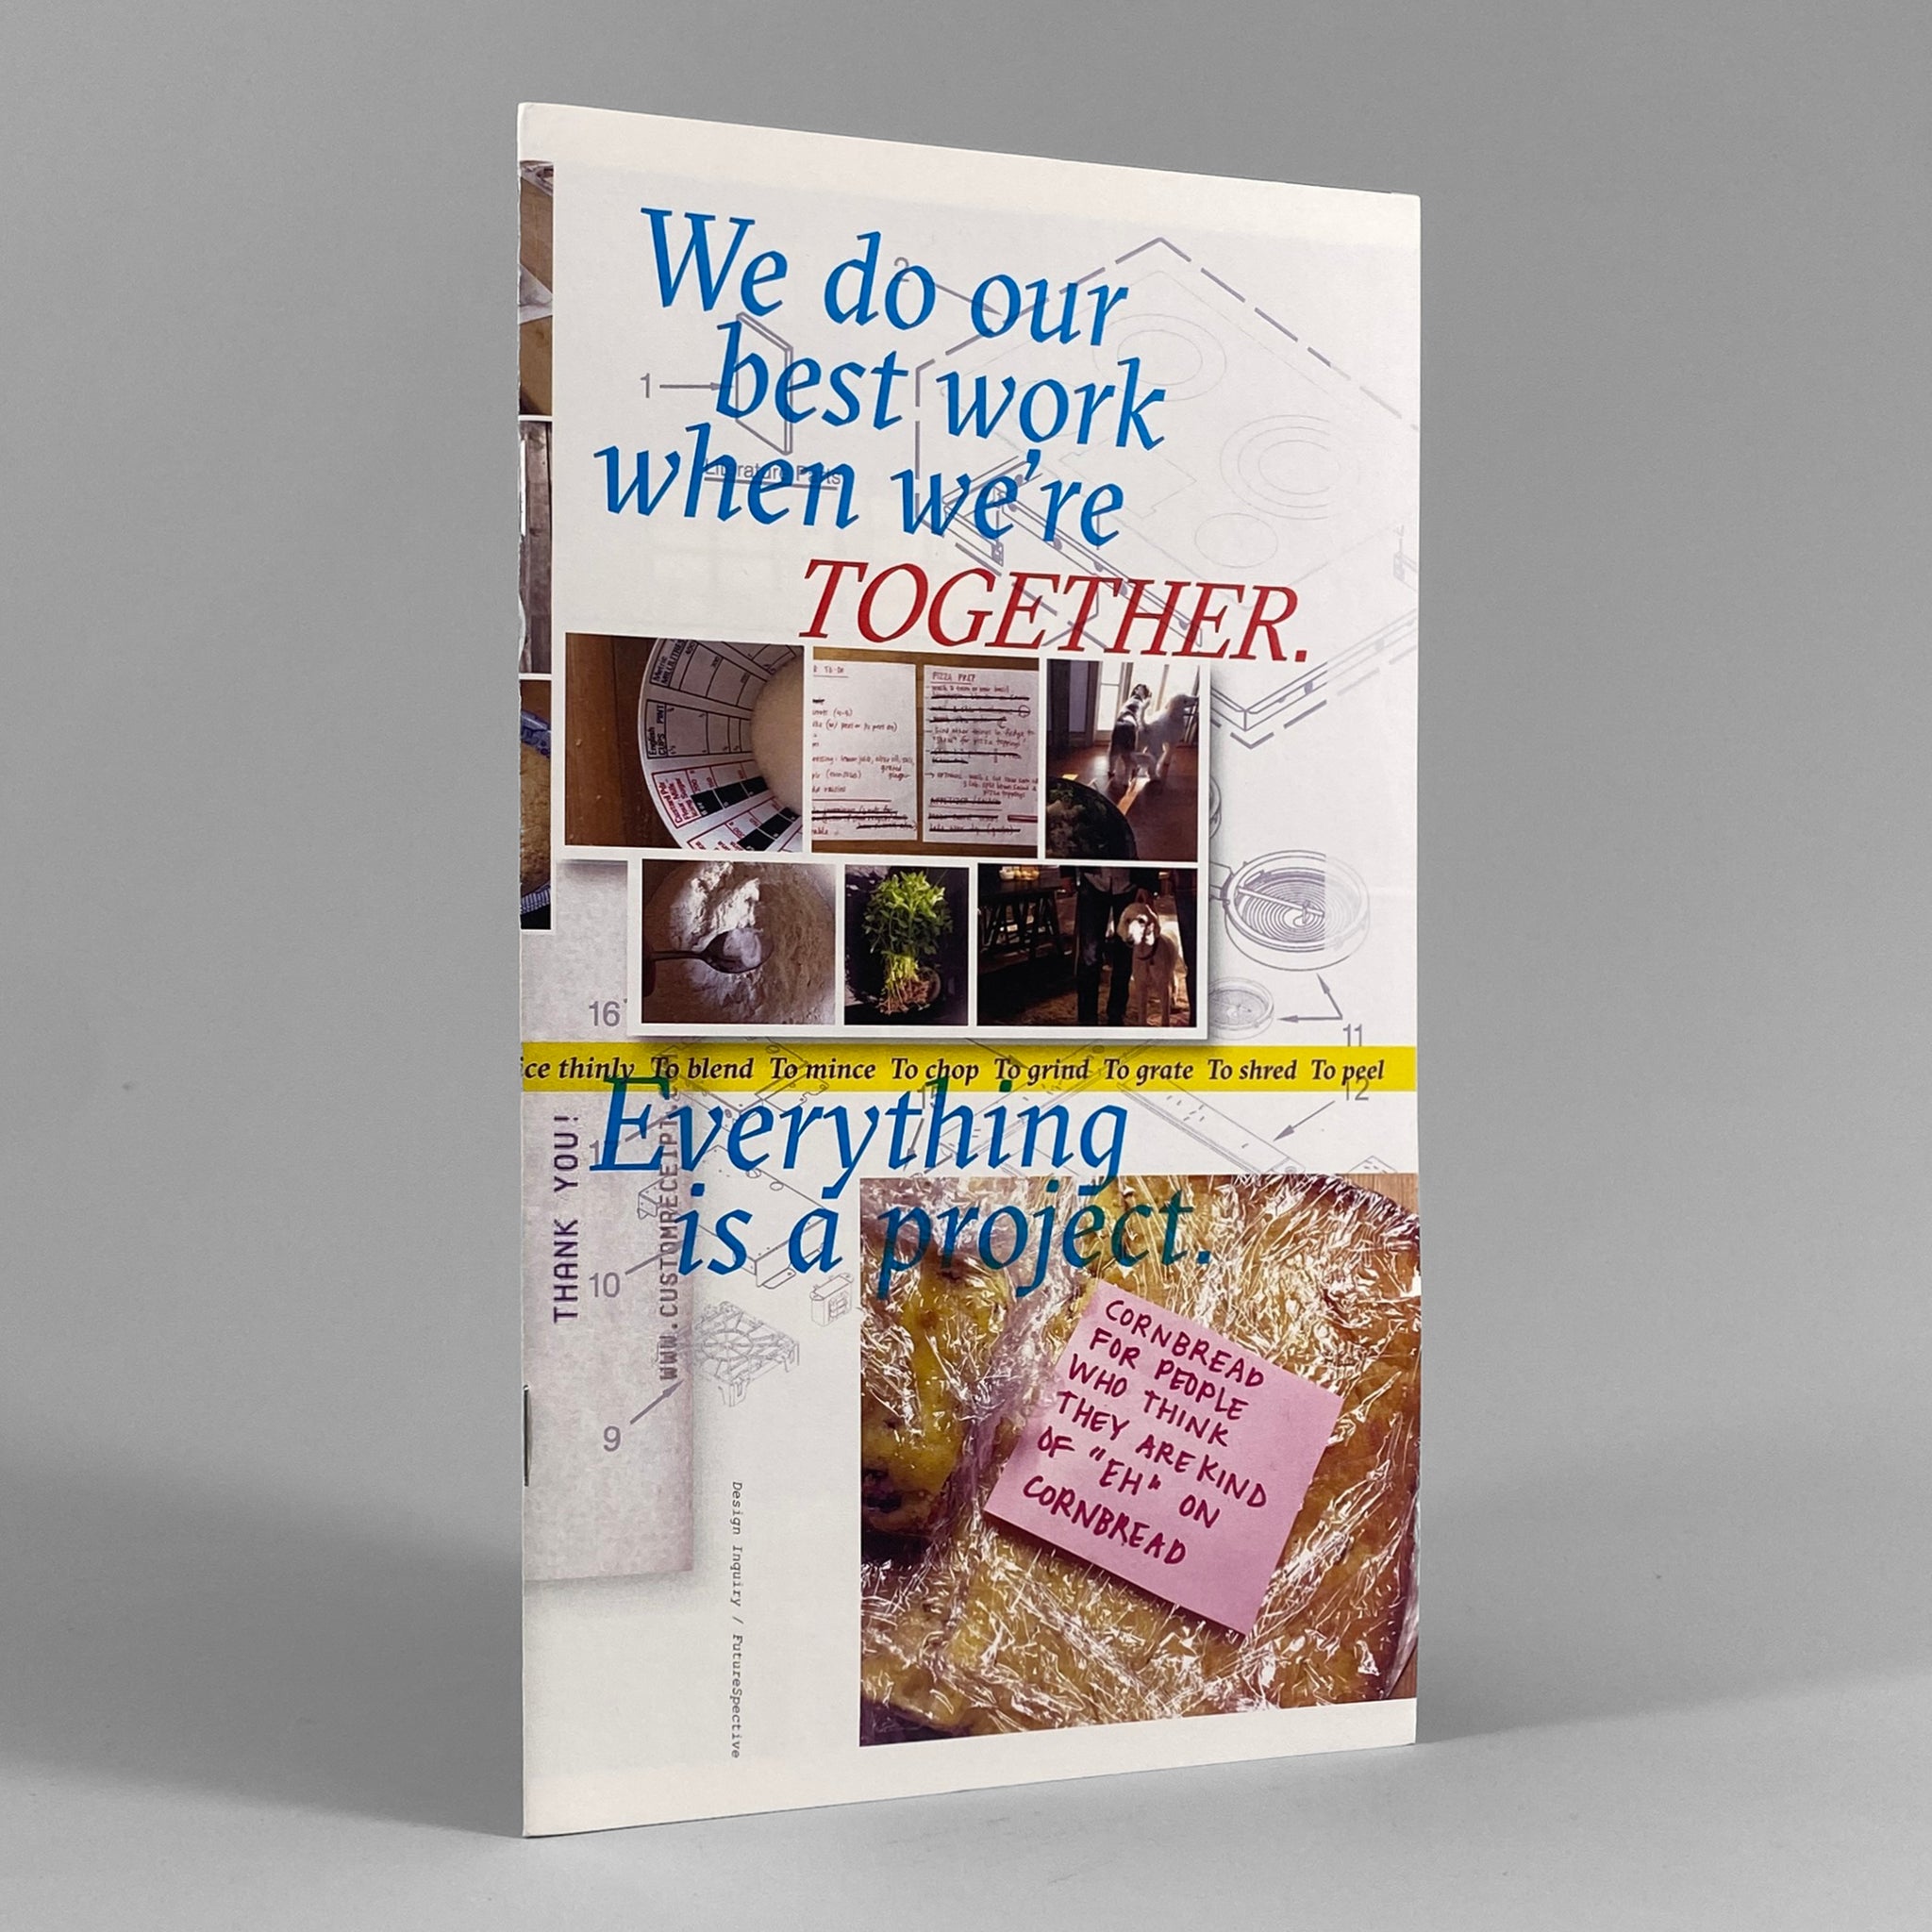 We Do our Best Work Together: Cooking and DesignInquiry